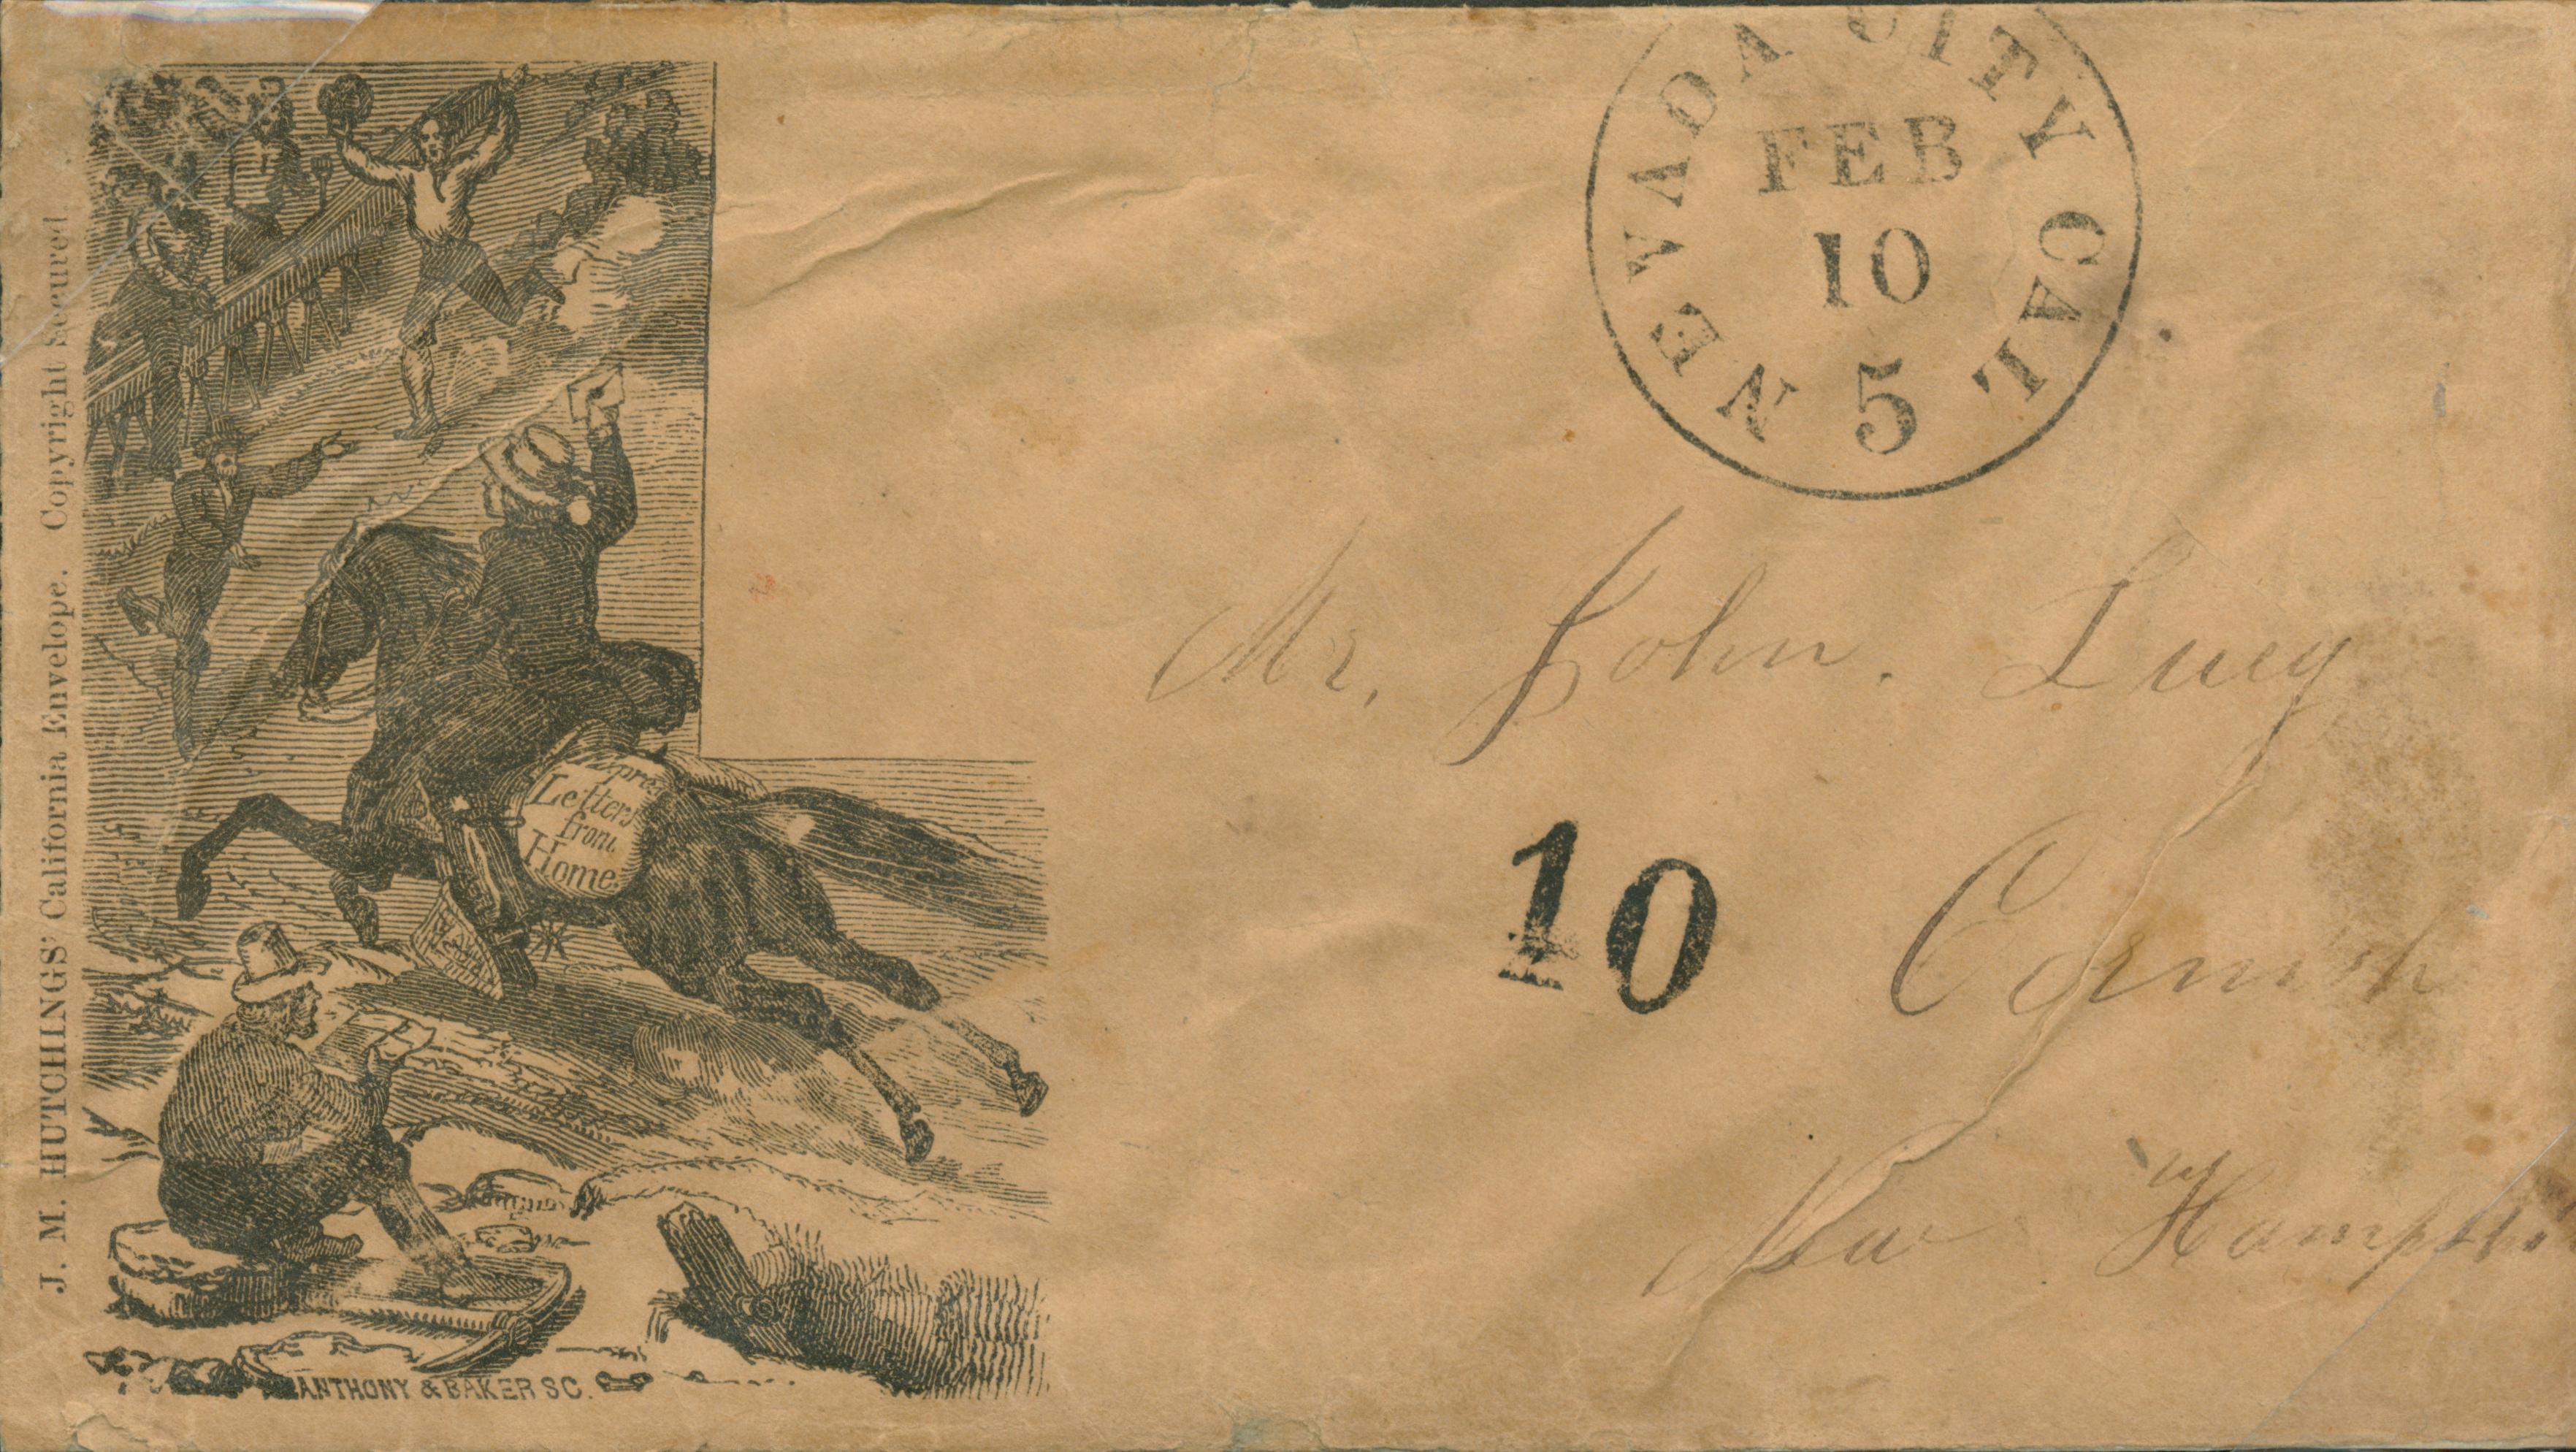 Shows a horse and rider (pony express?) delivering mail.